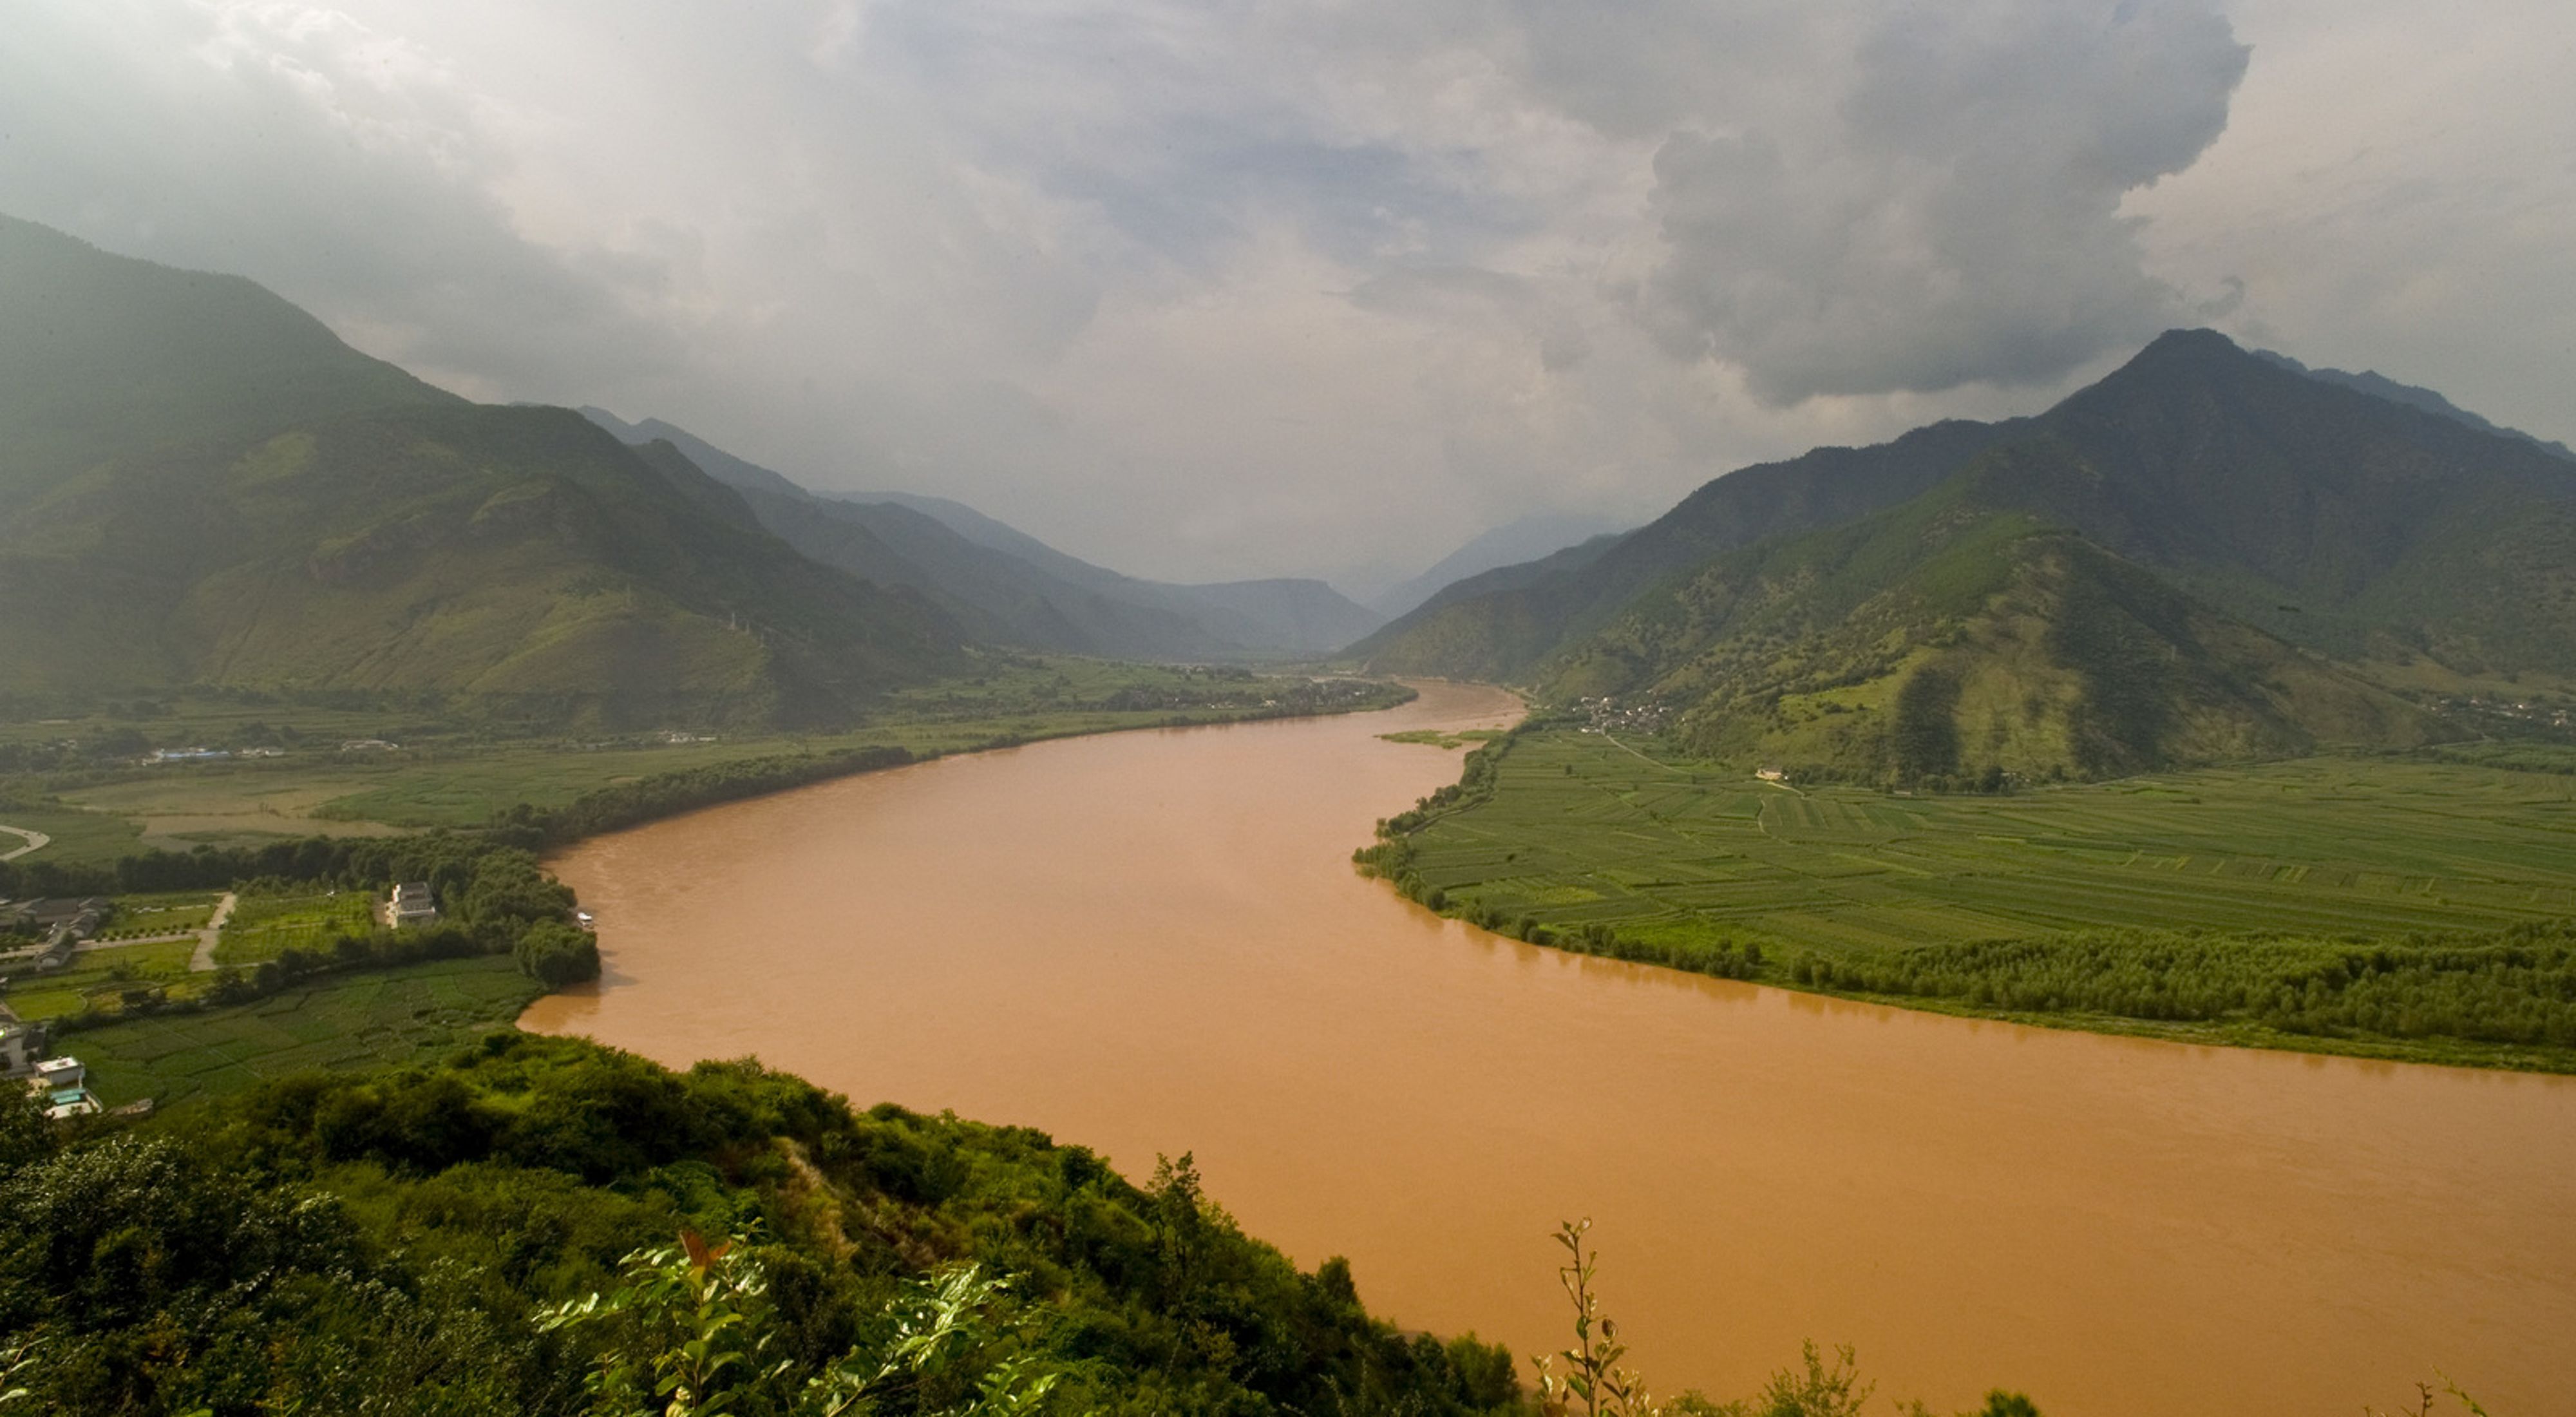 Recent rain turns the river a muddy-brown, viewed at a bend in the upper Yangtze River (Chang Jiang), Yunnan province, southwestern China. The Conservancy is working with the Chinese government to increase protection of Yunnan's natural areas by establishing a system of national parks.  